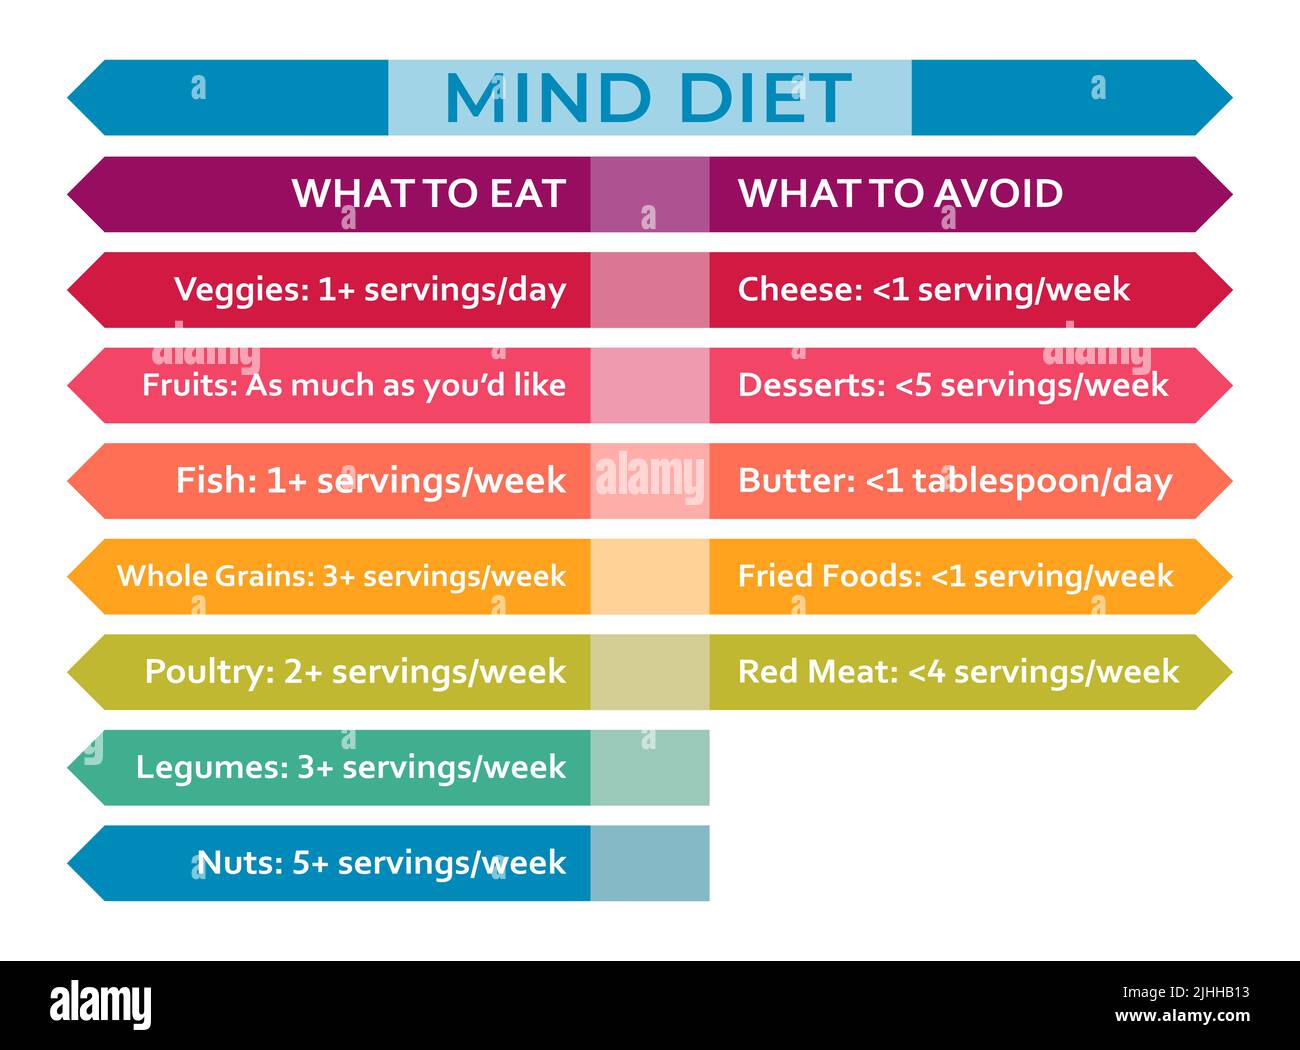 Healthy brain Mind Diet chart. Healthcare, dieting concept, help prevent dementia and slow the loss of brain function that can happen with age Stock Photo